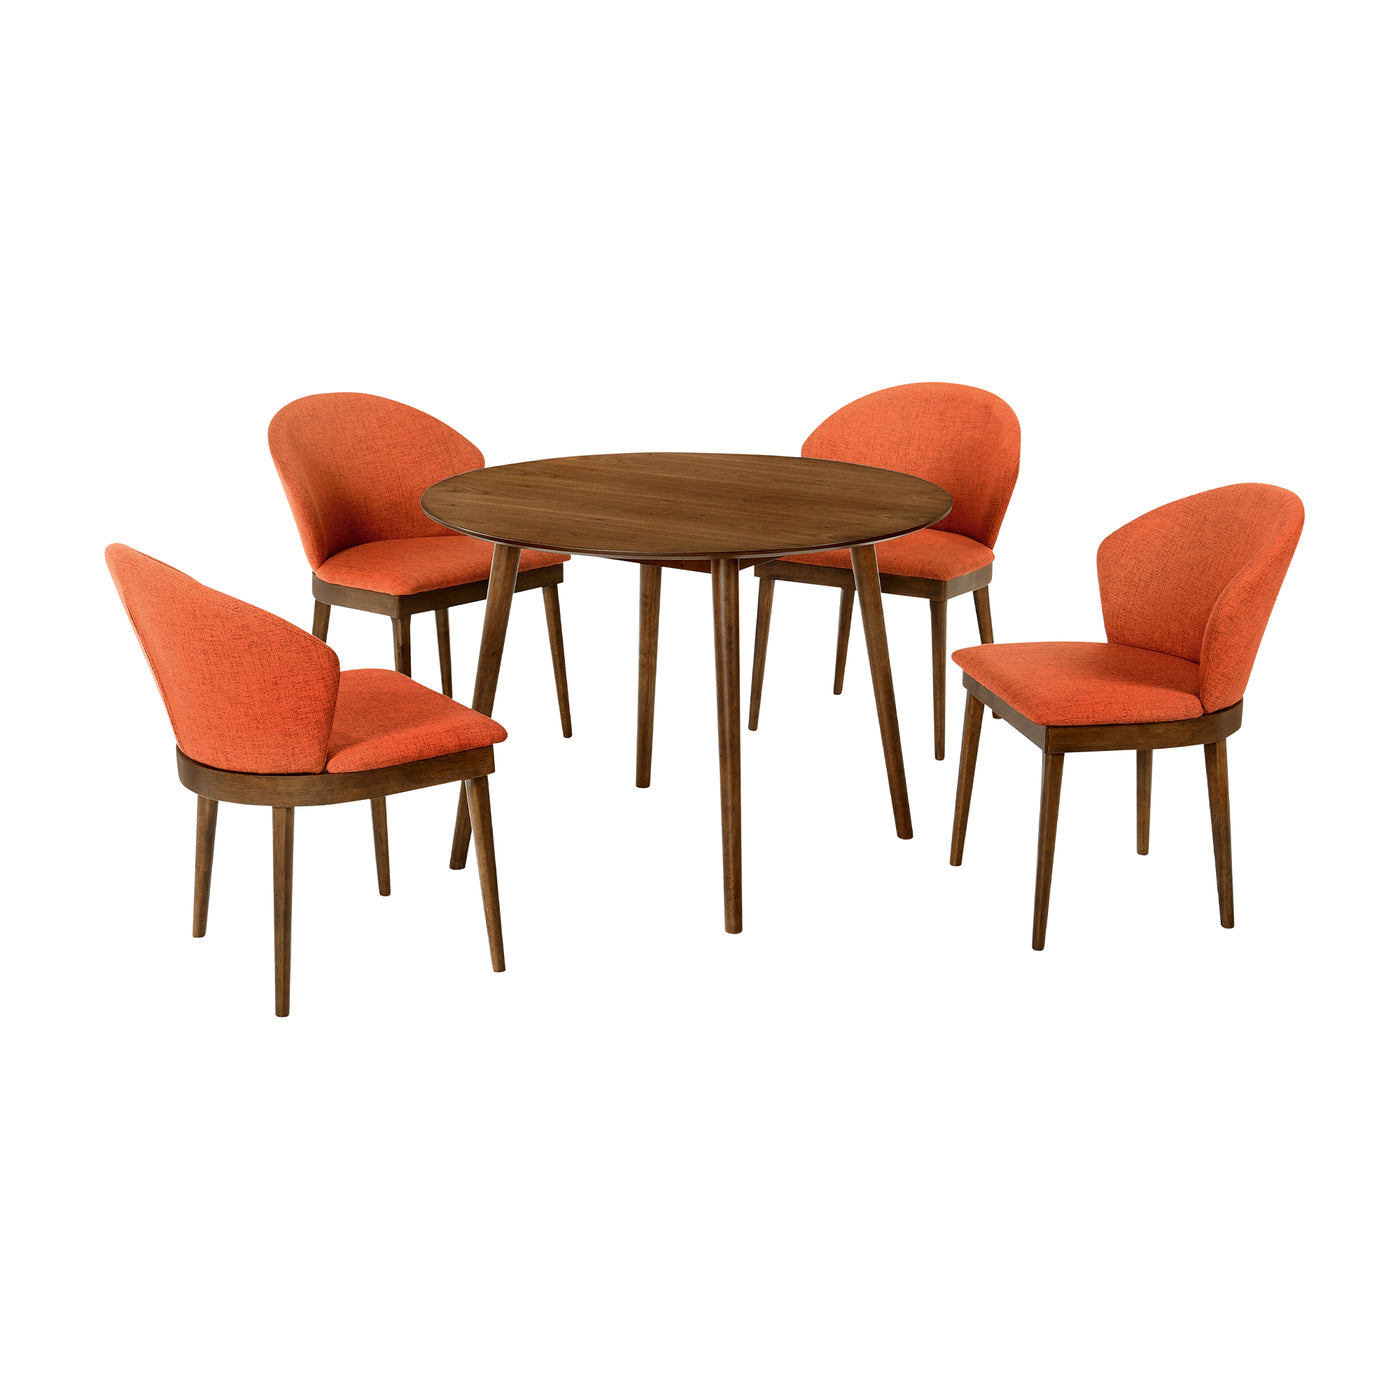 Arcadia and Juno 42 in. 5-Piece Dining Set